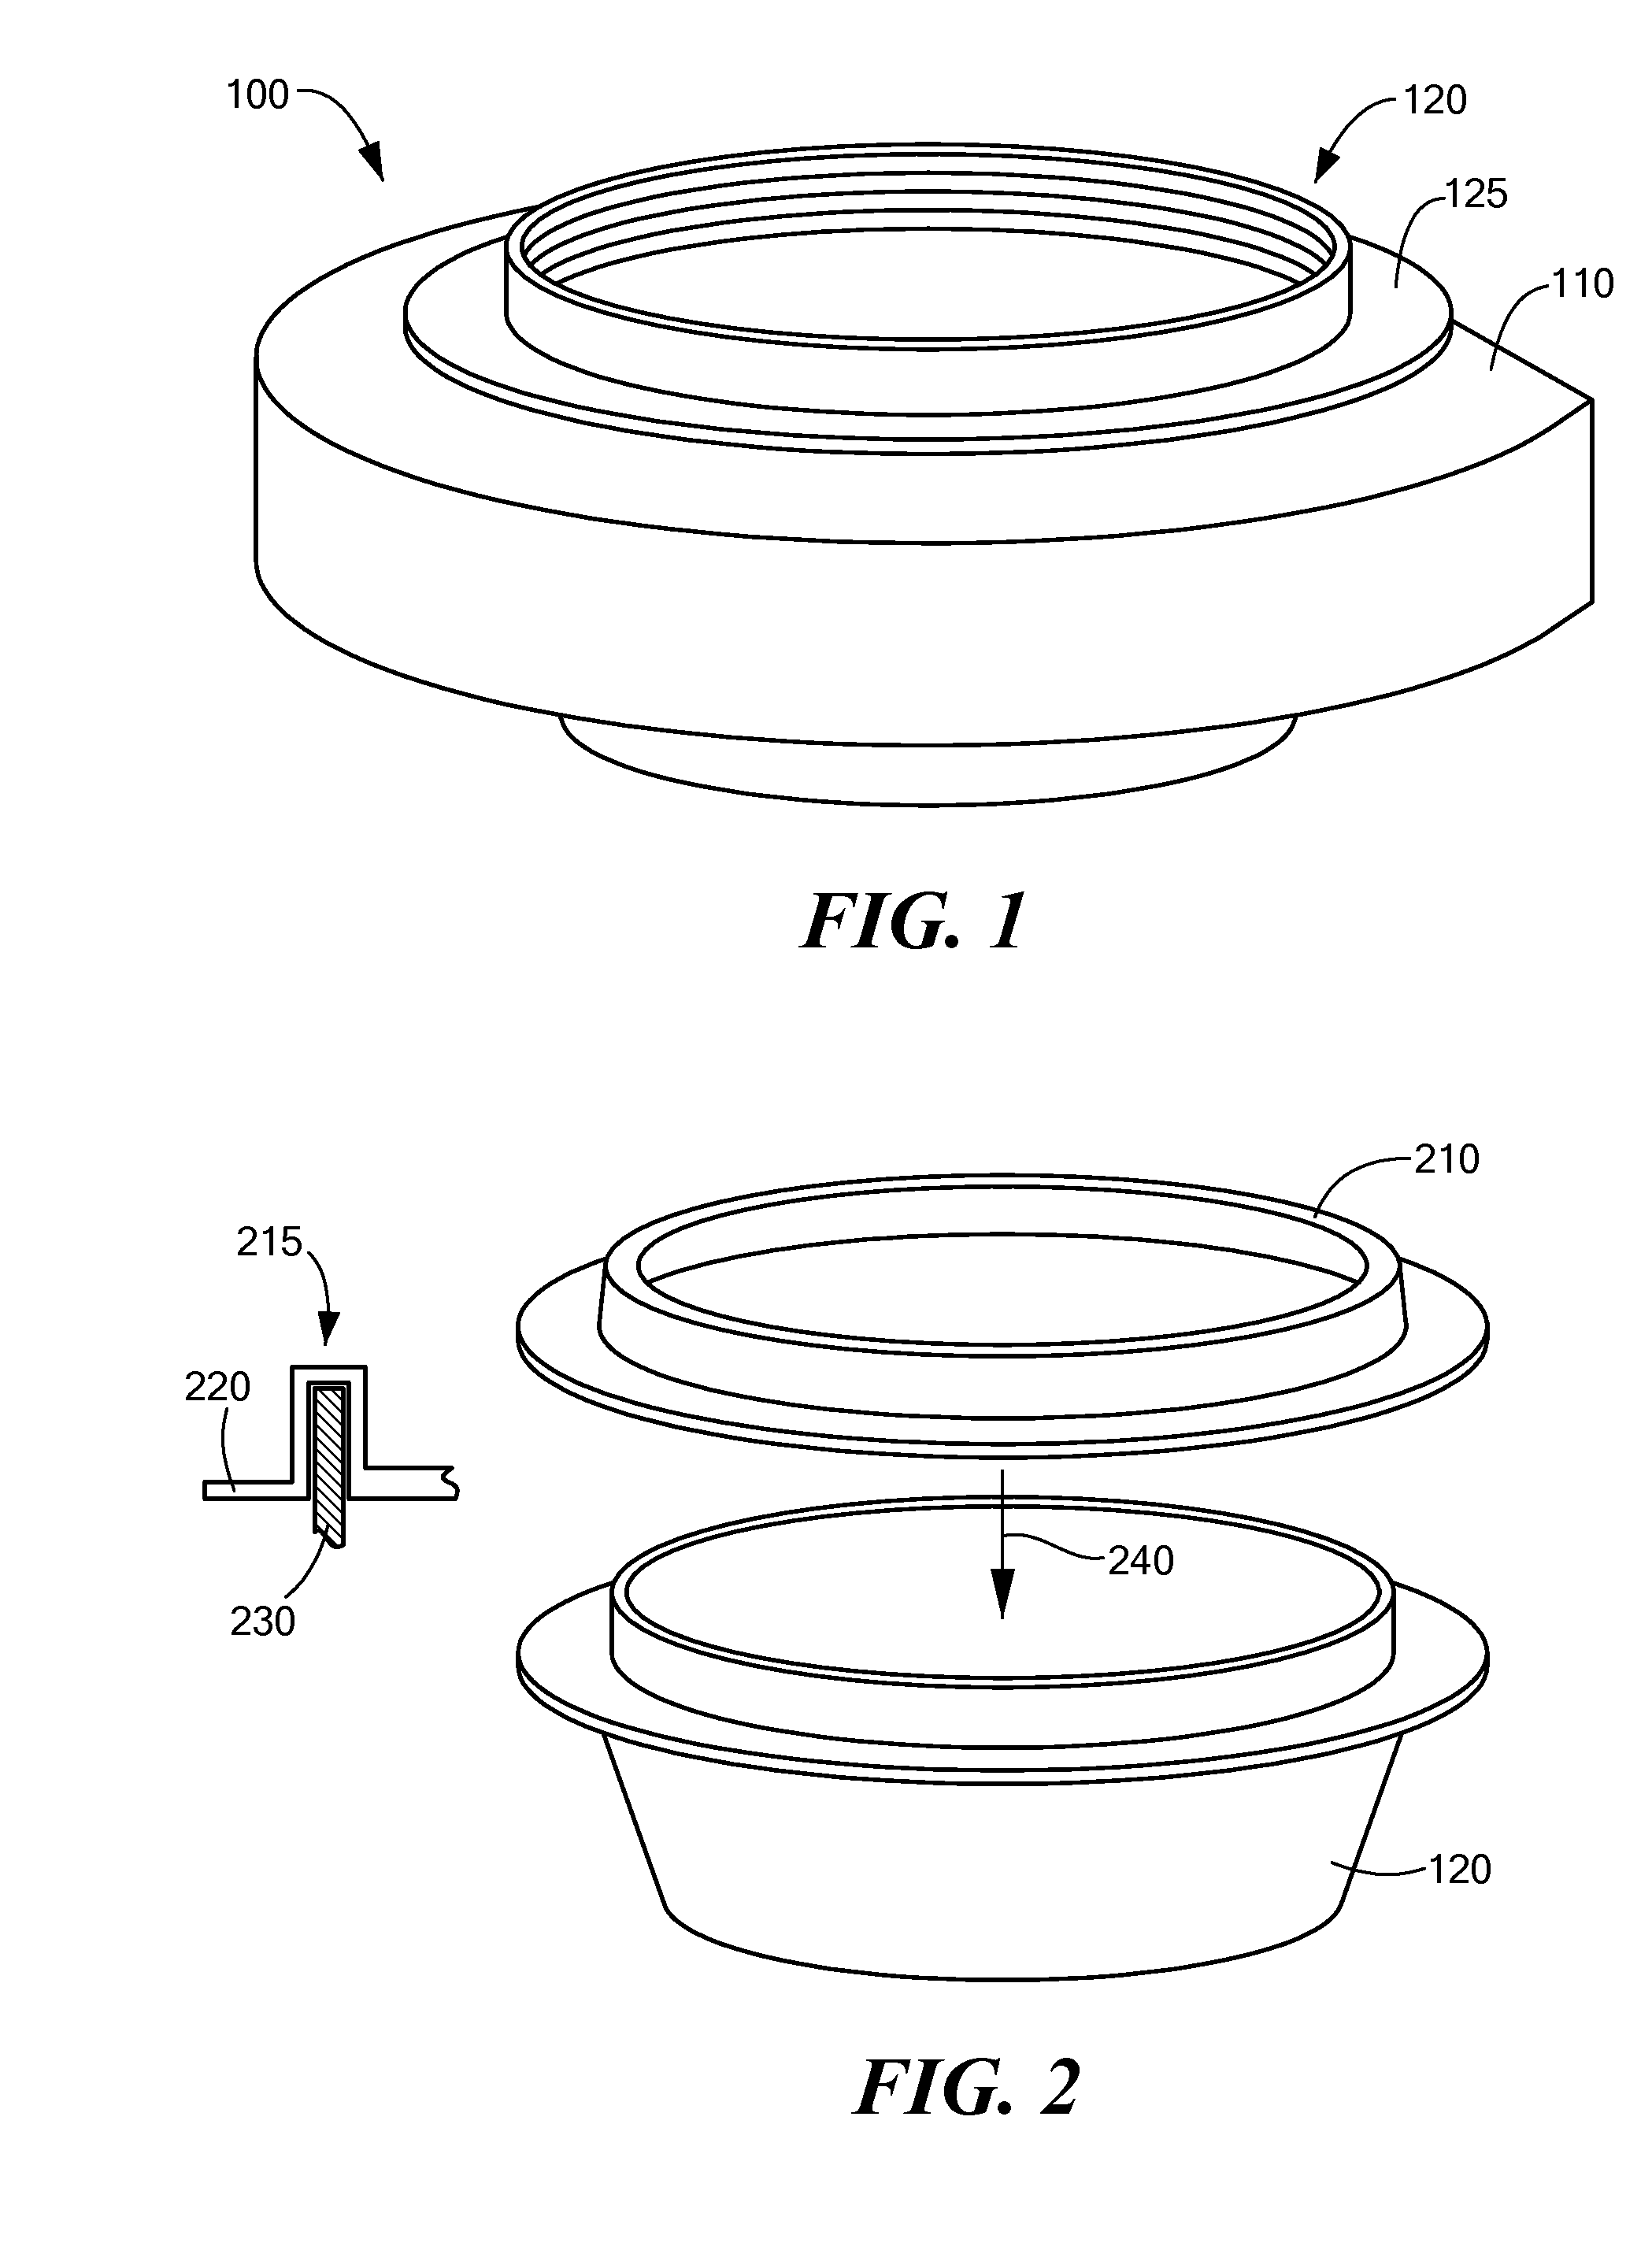 System and Method for Disposal of Mutagen Waste